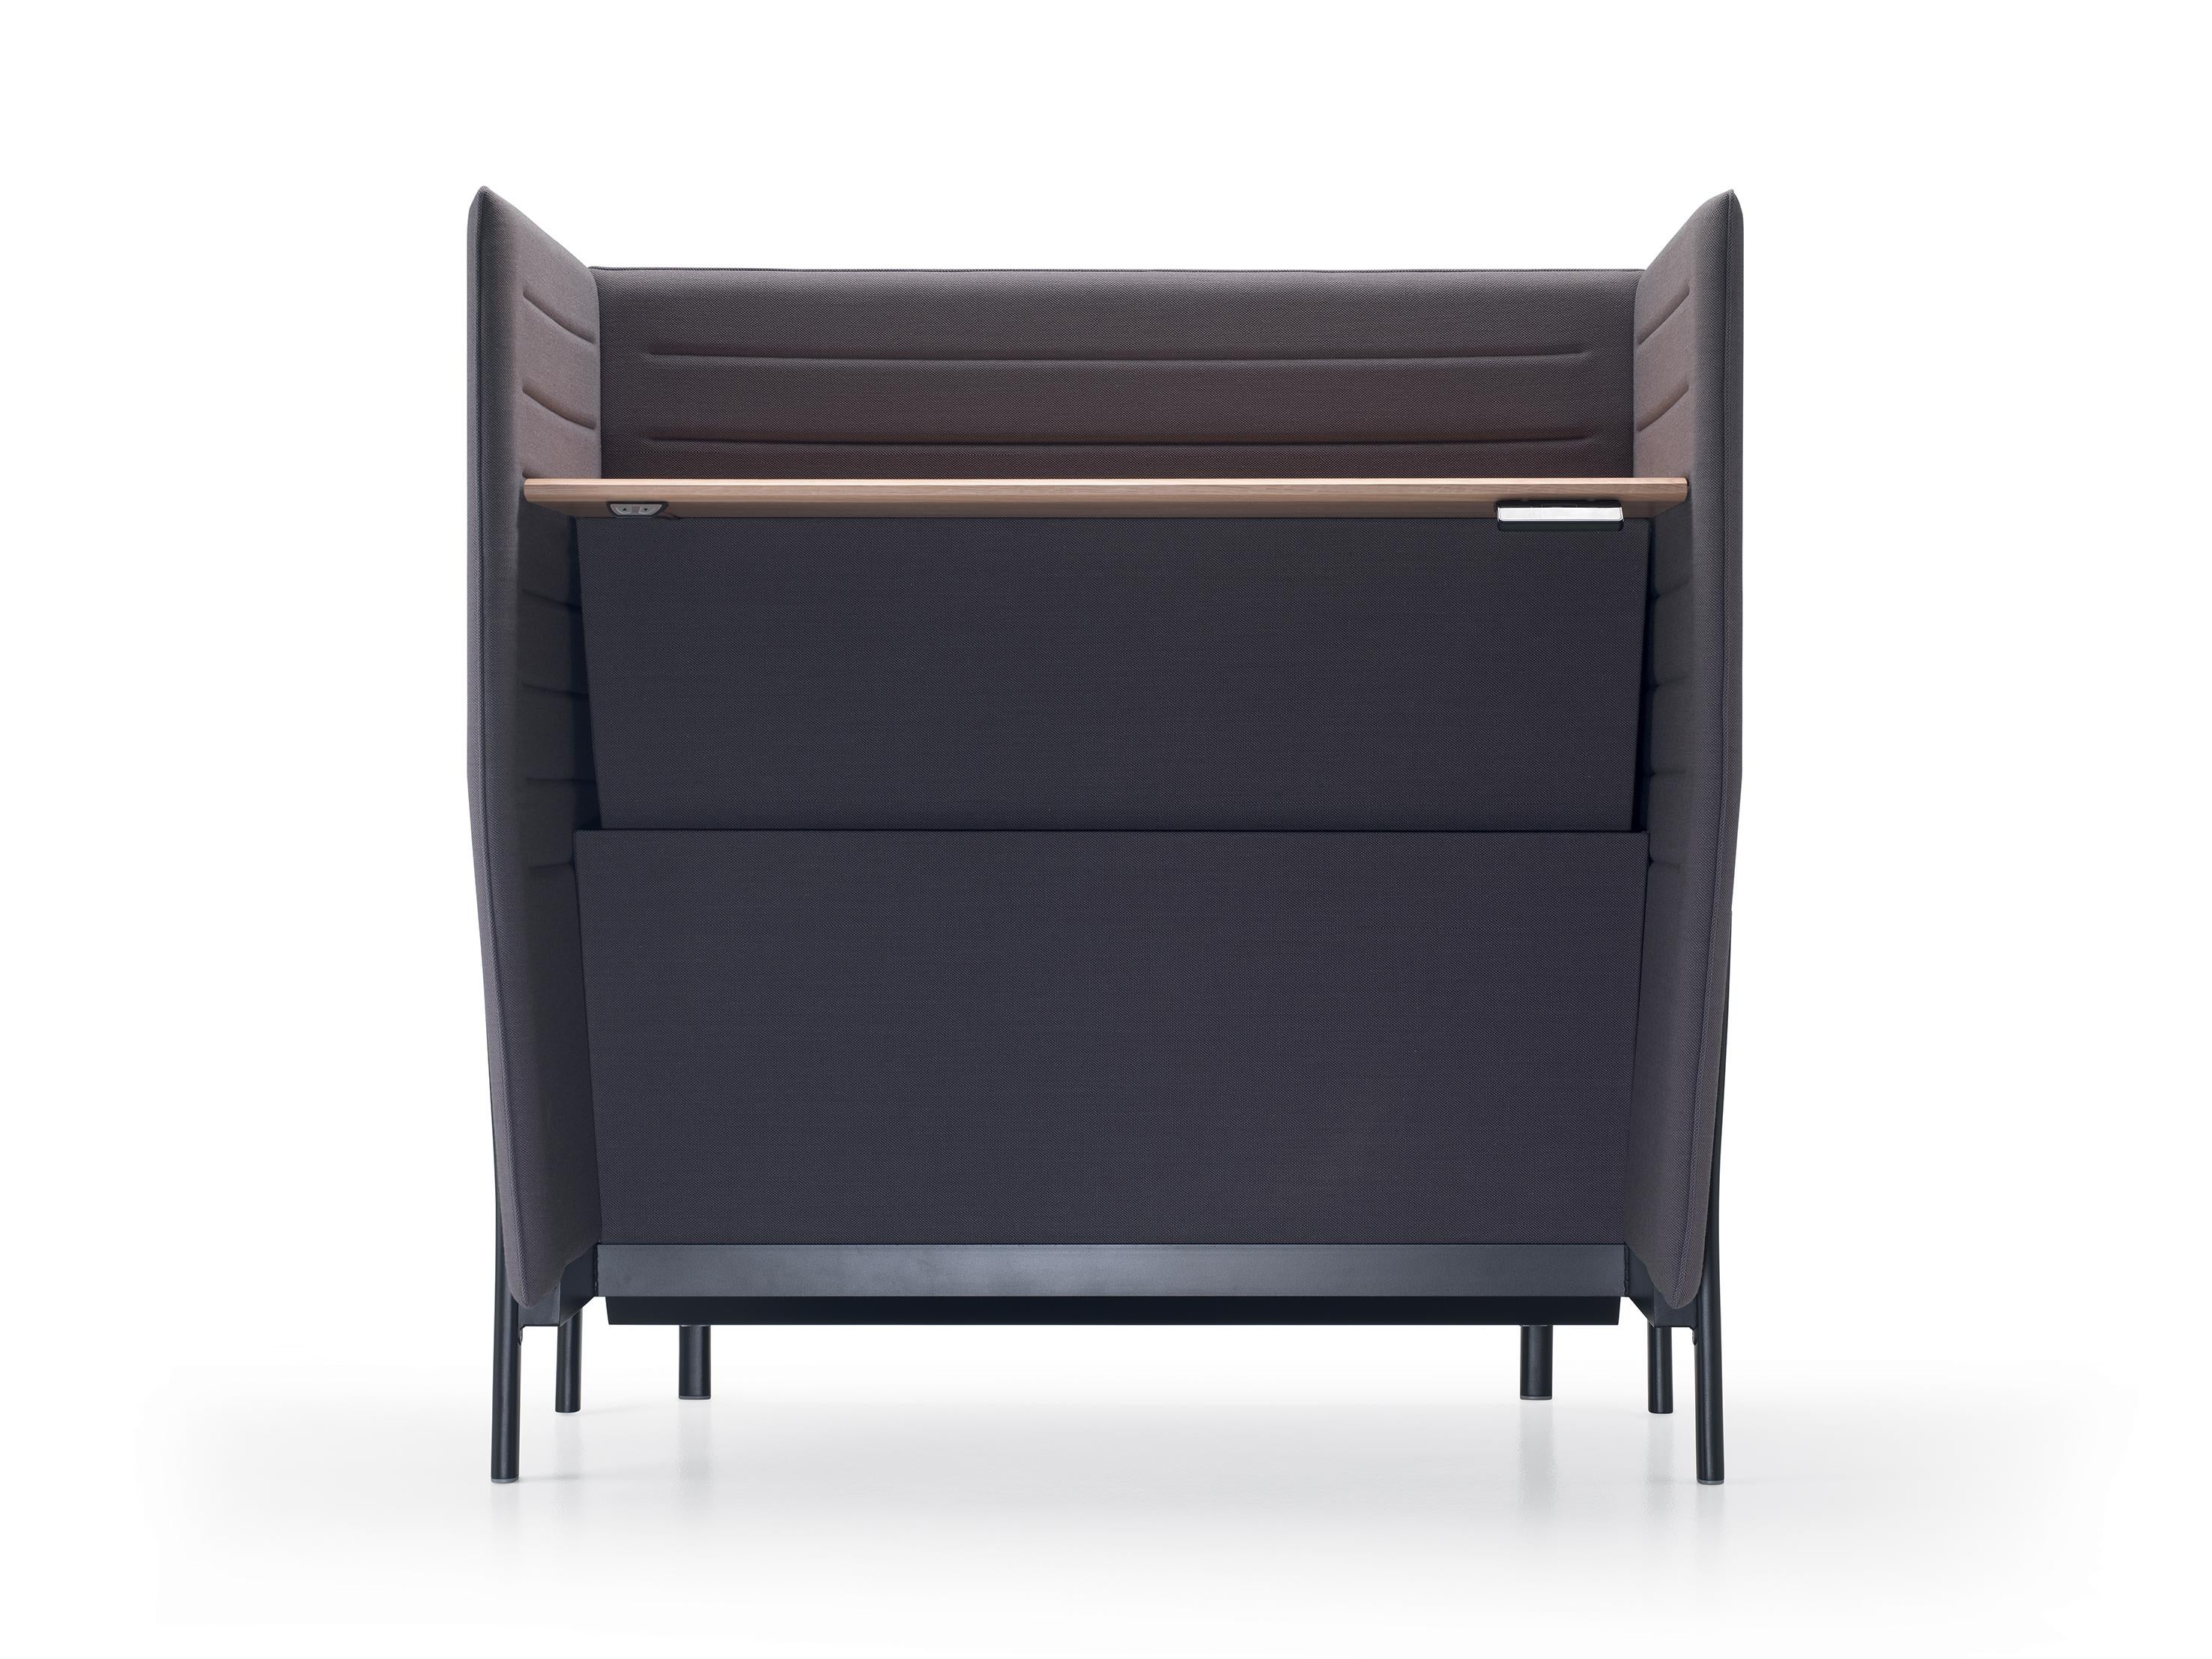 Alias 886 Large Eleven High Desk Adjustable with Oak Top and Upholstered Panels by PearsonLloyd

Desk. Structure with legs in die-cast aluminium and frame in steel lacquered or polished.Panels covered with fabric.Height adjustable top in MDF oak